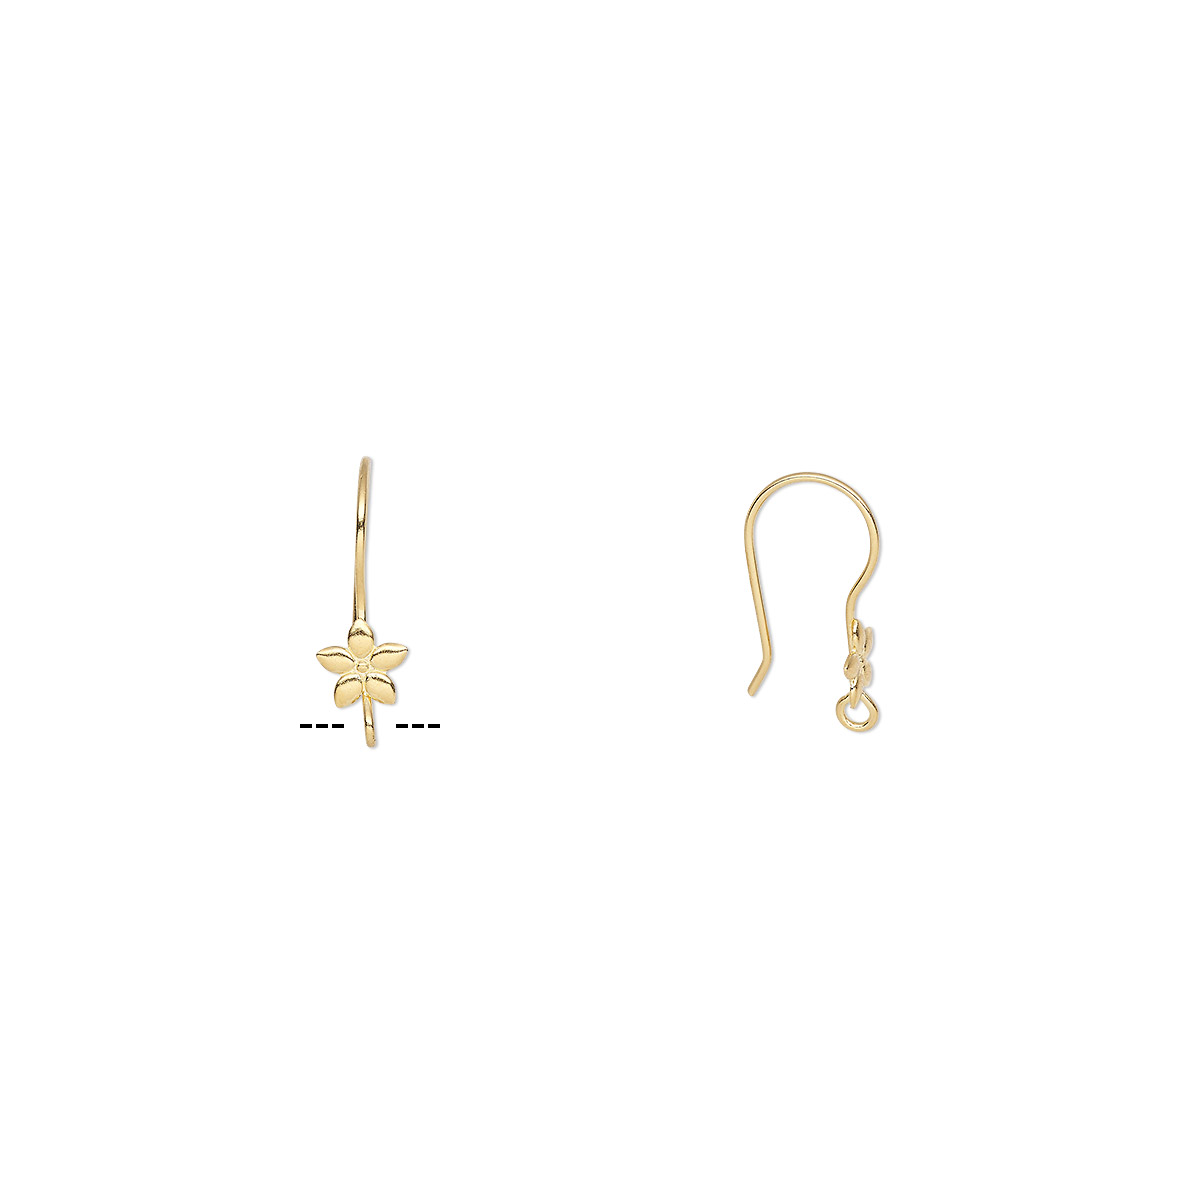 Ear wire, gold-plated stainless steel, 21mm fishhook with flower and ...